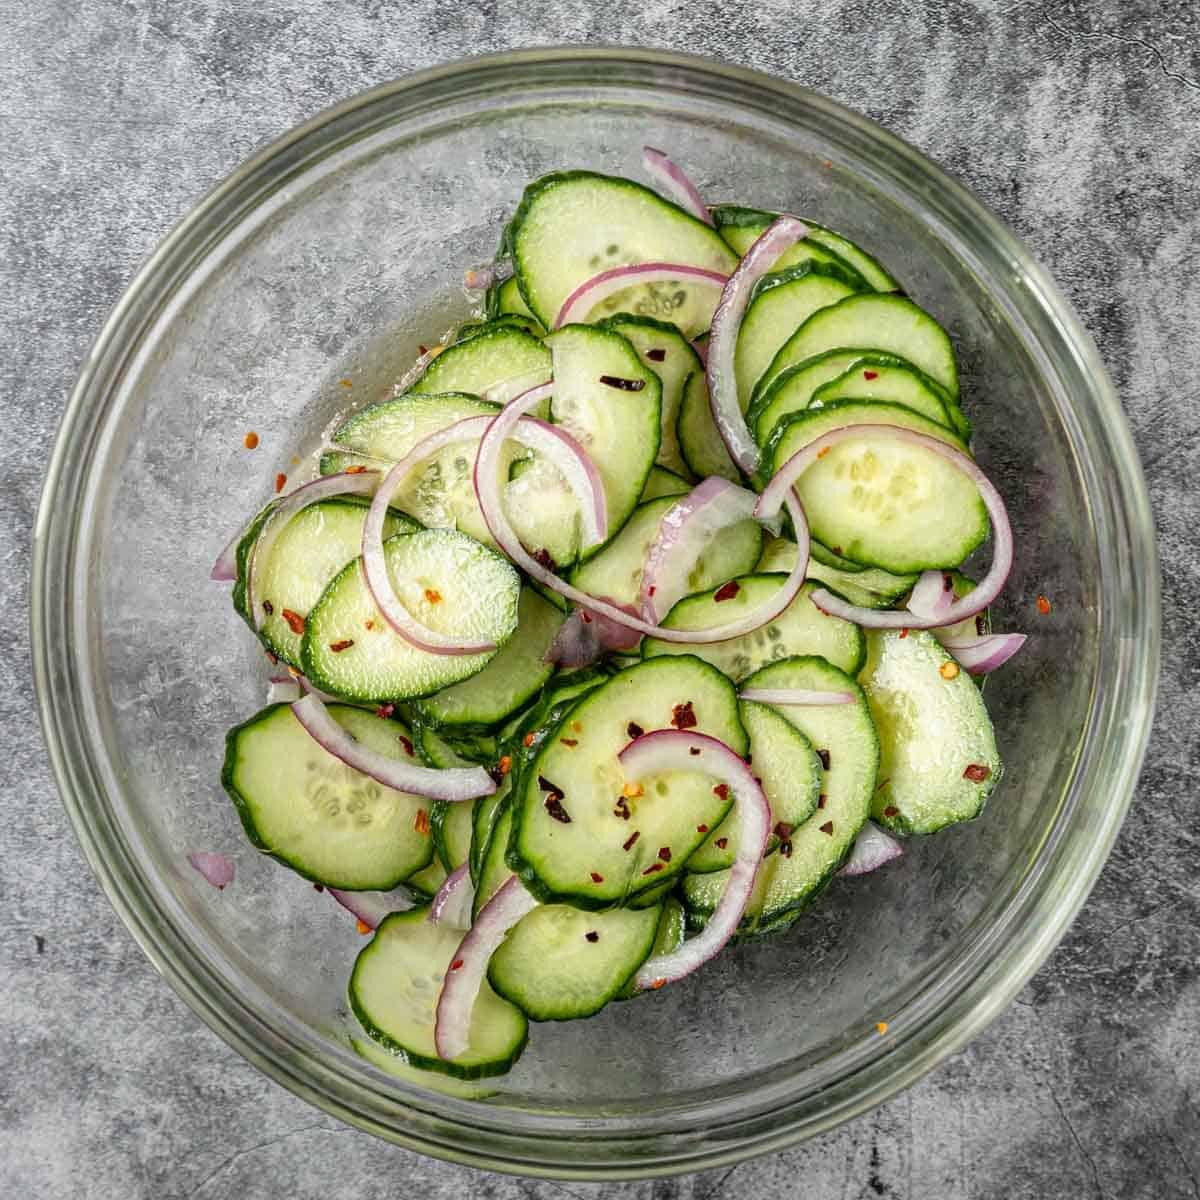 cucumbers and onions mixed together with a pickling liquid